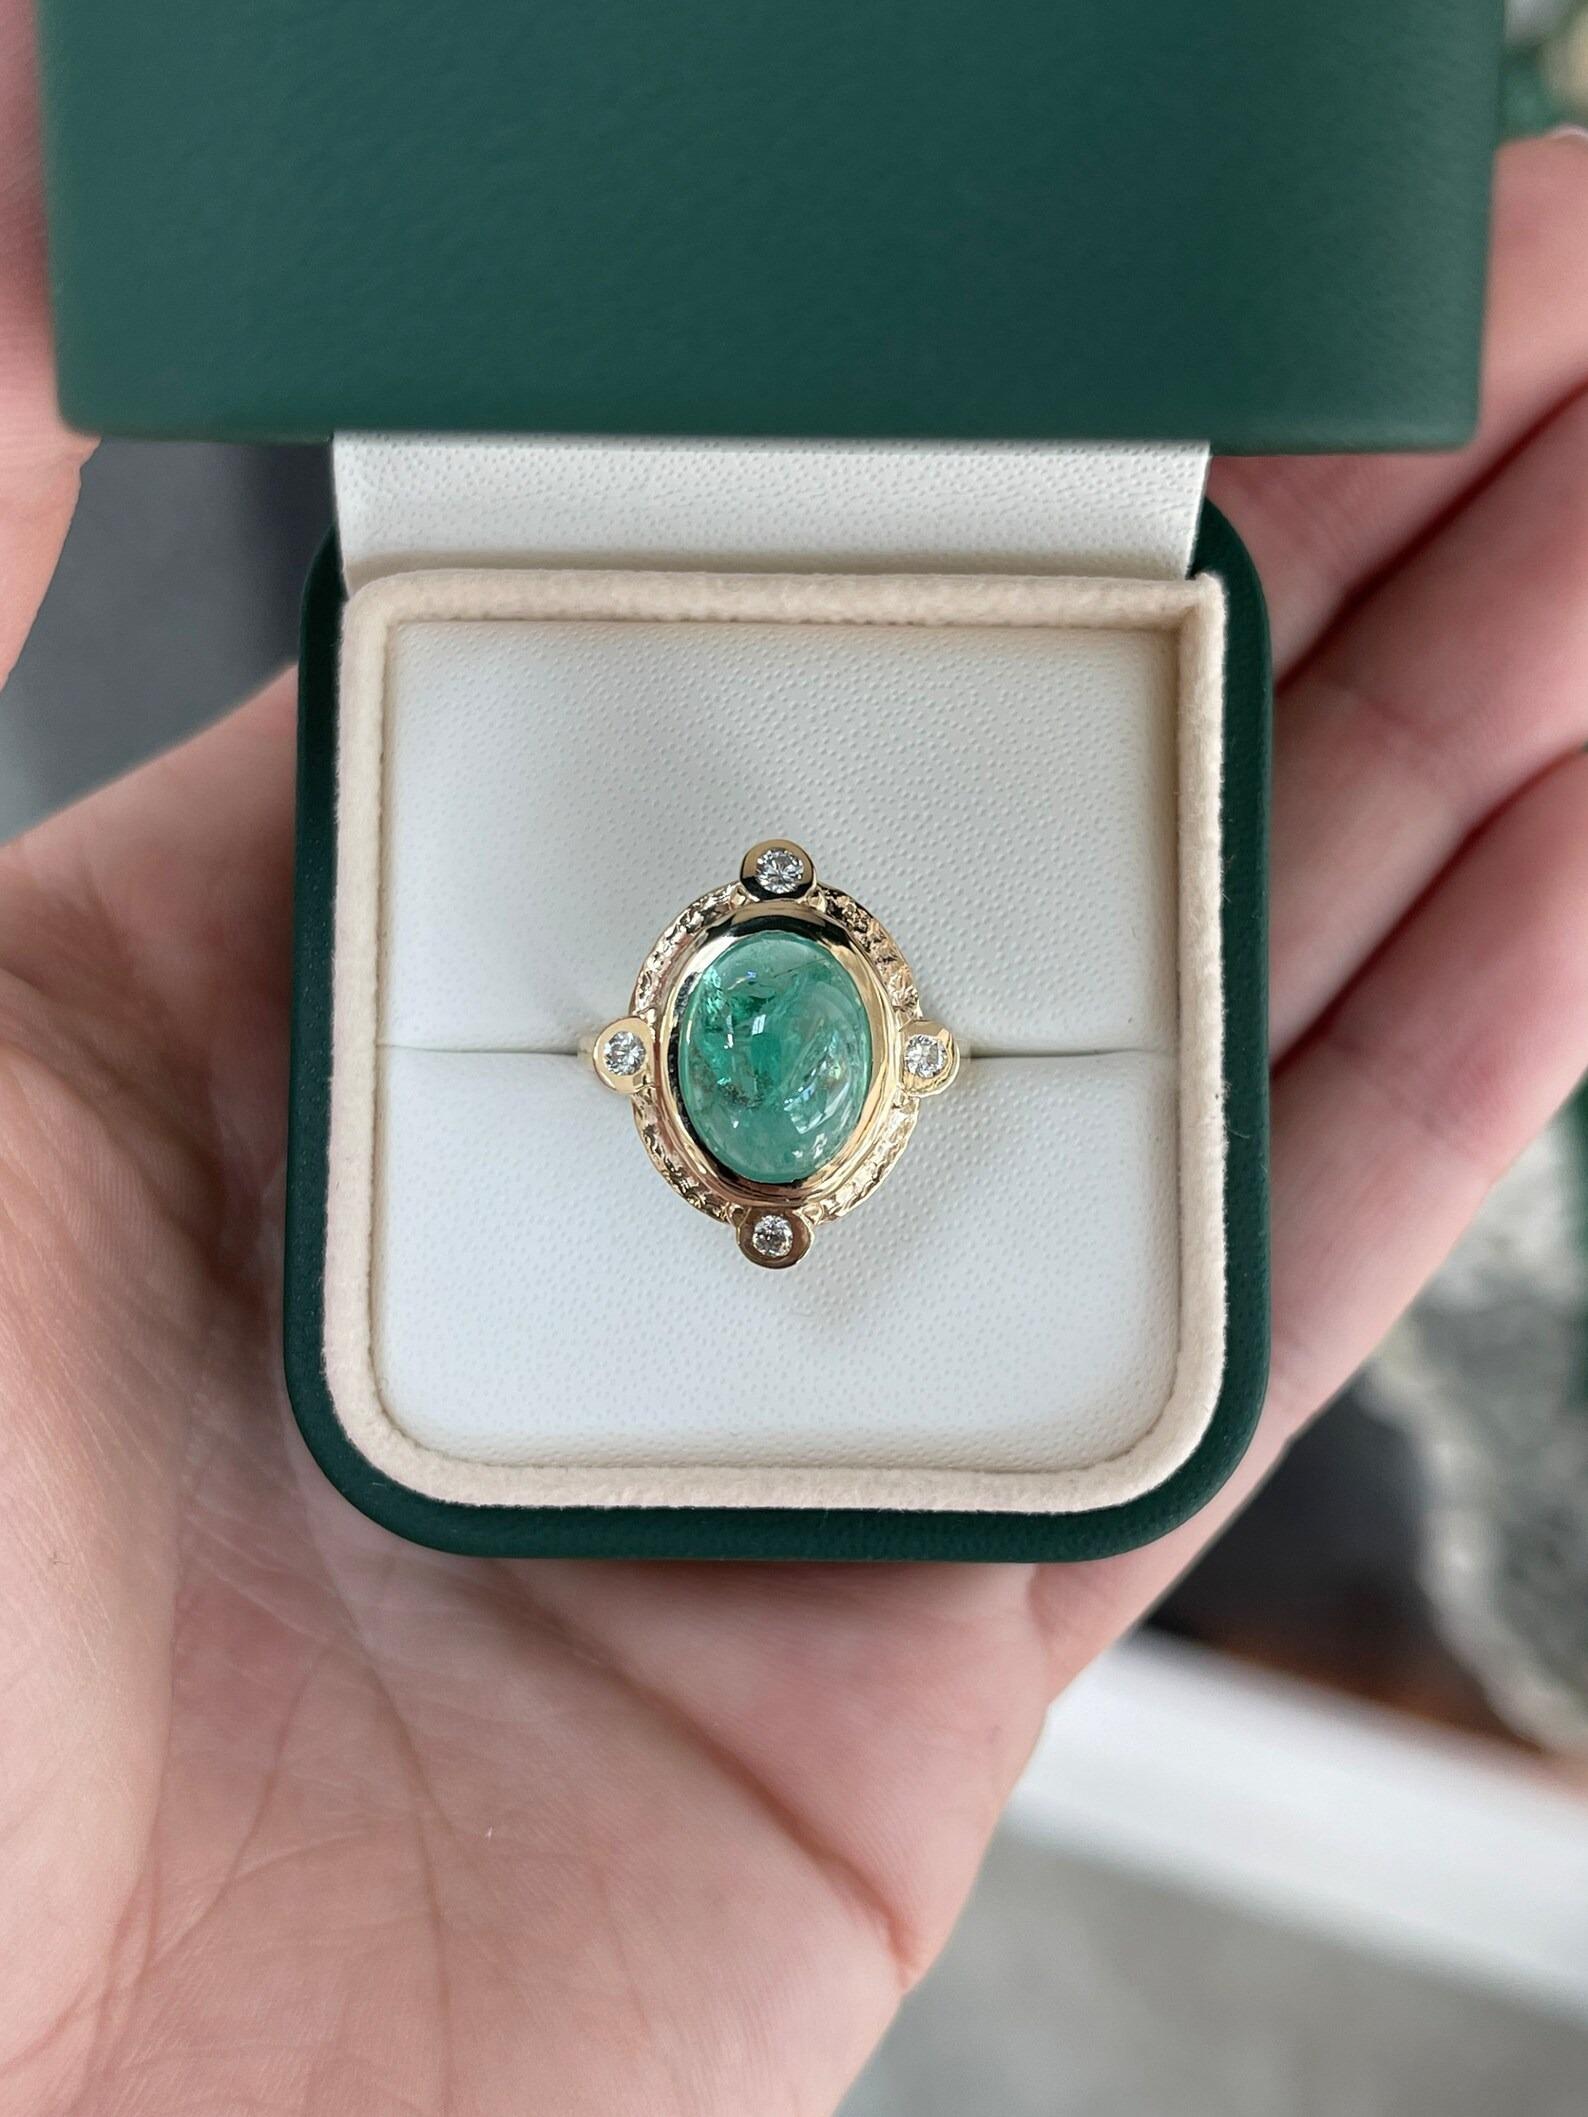 Women's 5.45tcw Rare Oval Cabochon Cut Emerald & Diamond Accent Vintage Styled Ring 14K For Sale